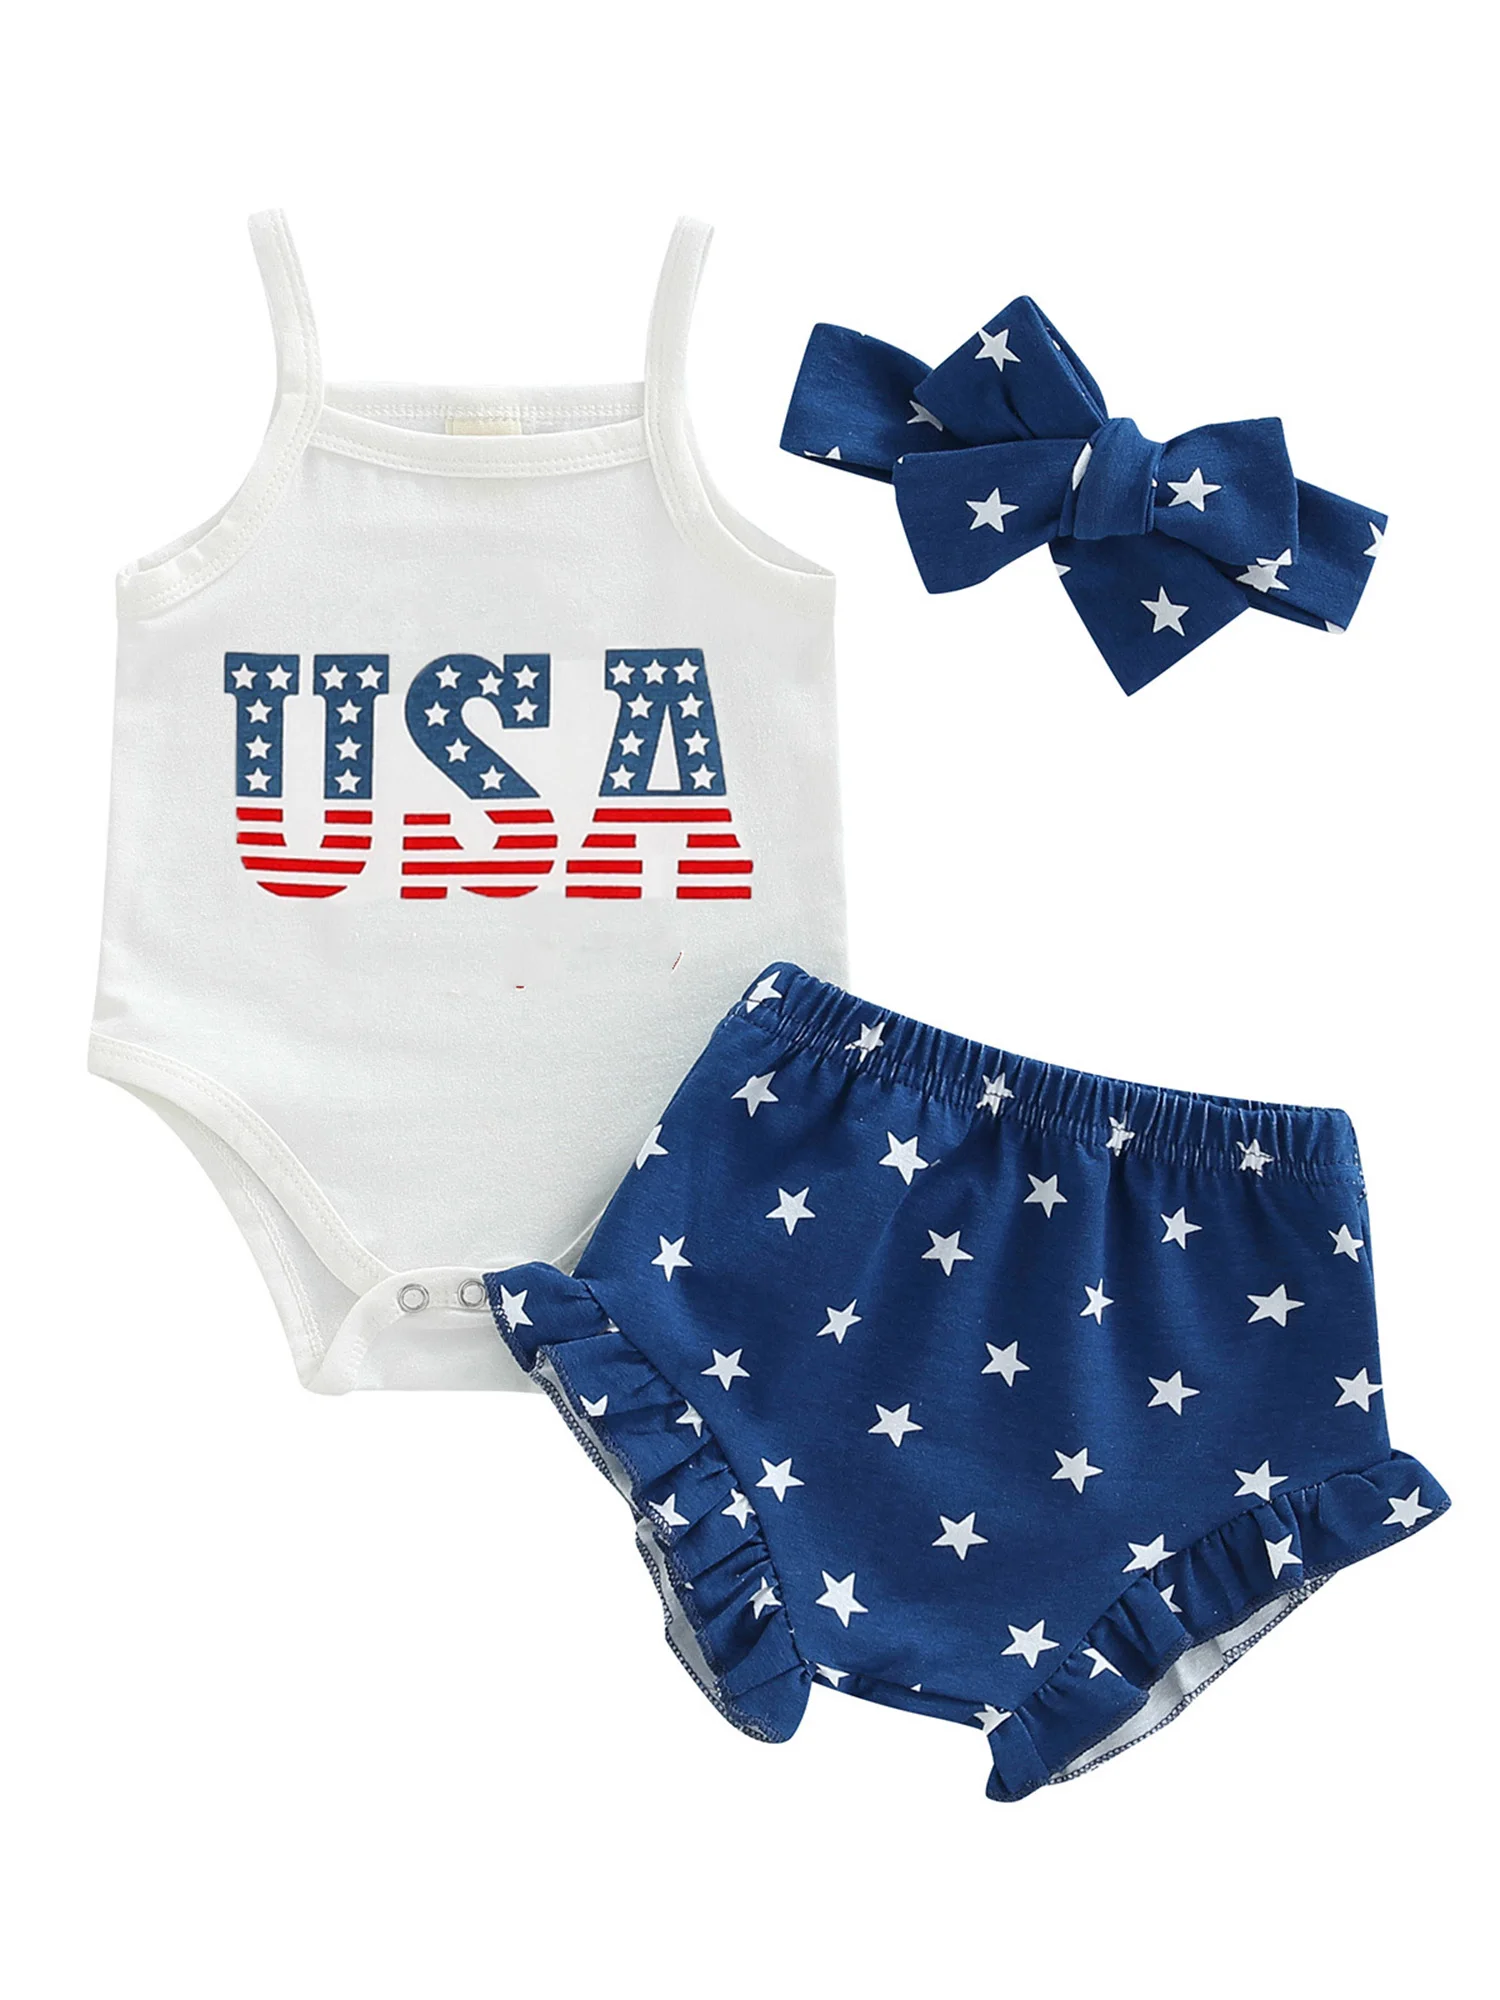 

Cute and Patriotic Baby Girl s 4th of July Outfit - Adorable Stars and Stripes Romper with Matching Headband